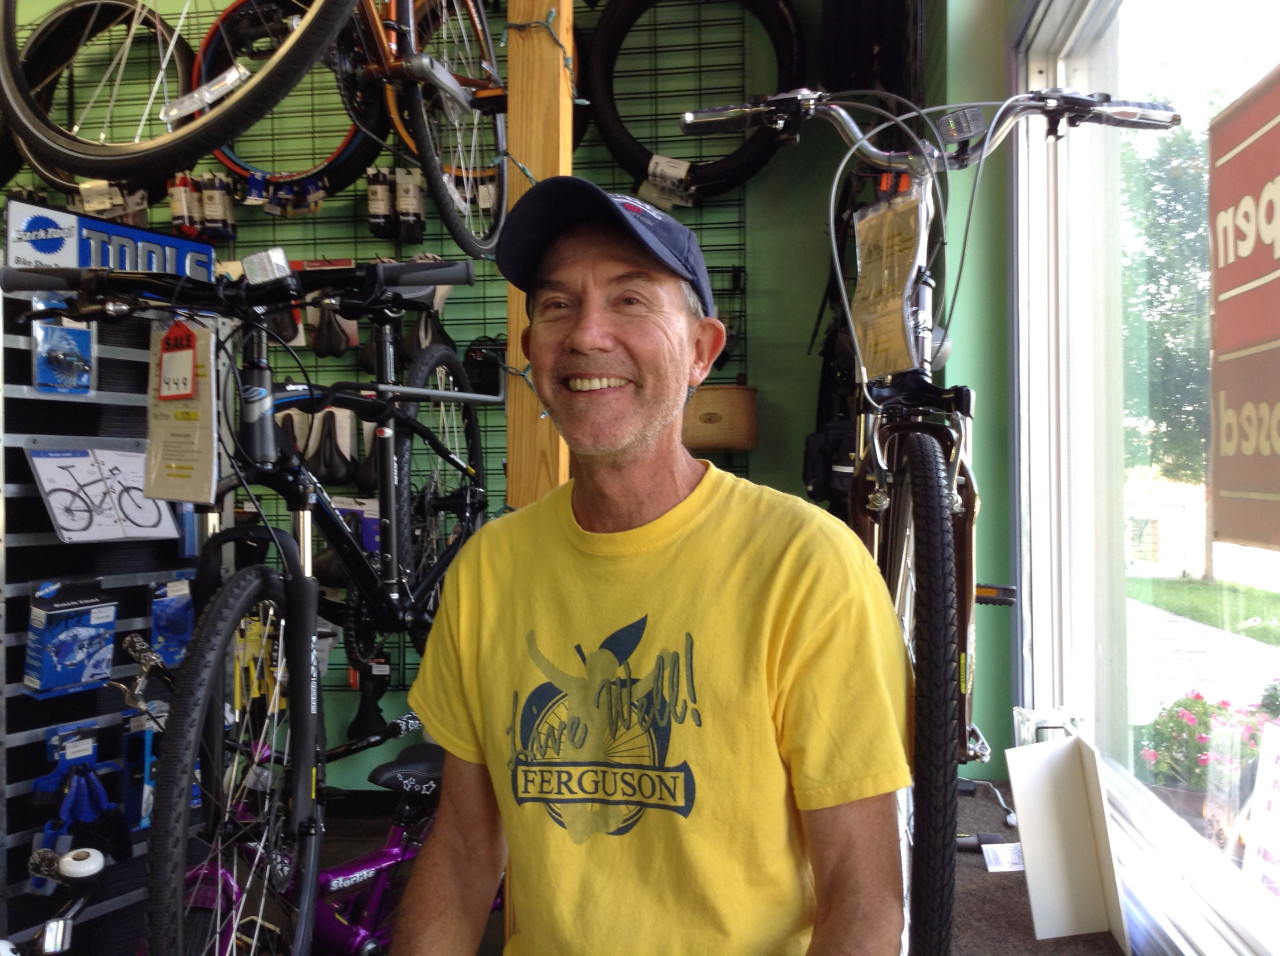 Gerry Noll, owner of Ferguson Bicycle, says the white community wasn&#039;t aware of the extent of the racial tensions. (Deborah Becker)